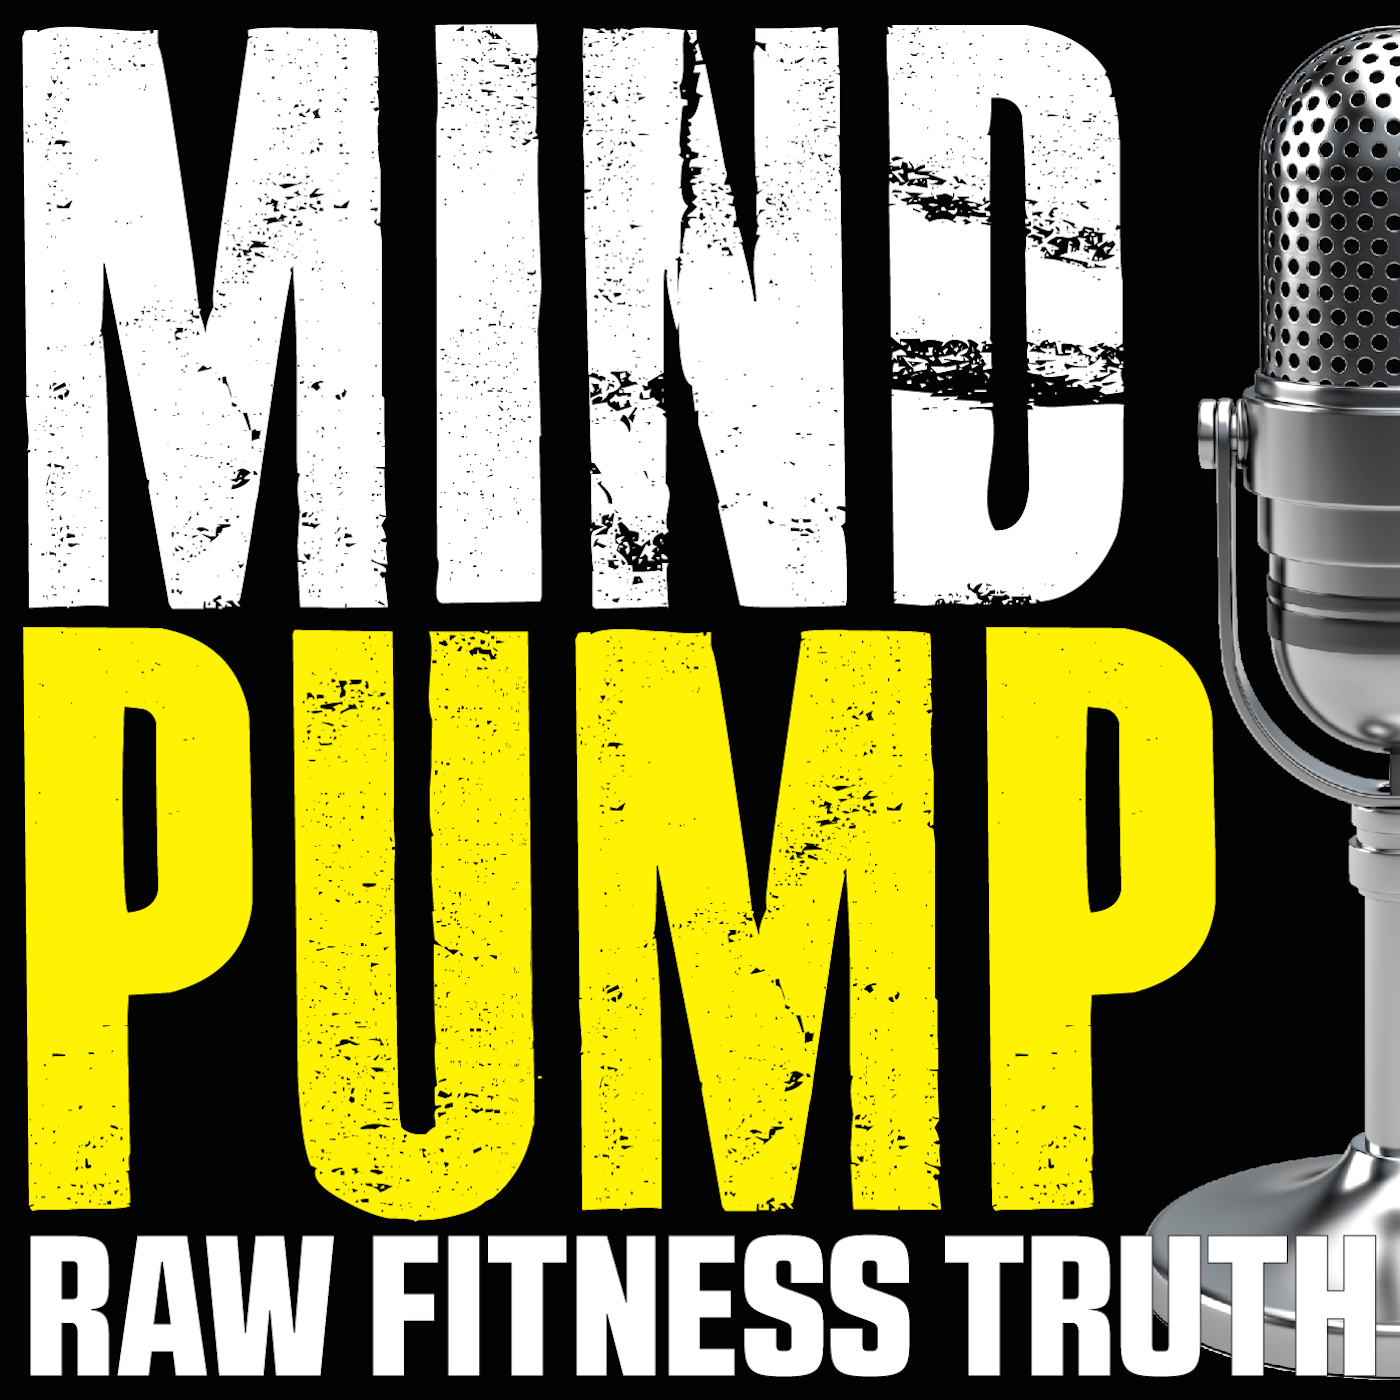 098: Famous Workout Partners, Ridiculous Exercises, Binge & Stress Eating and Adam’s Dating Timeline